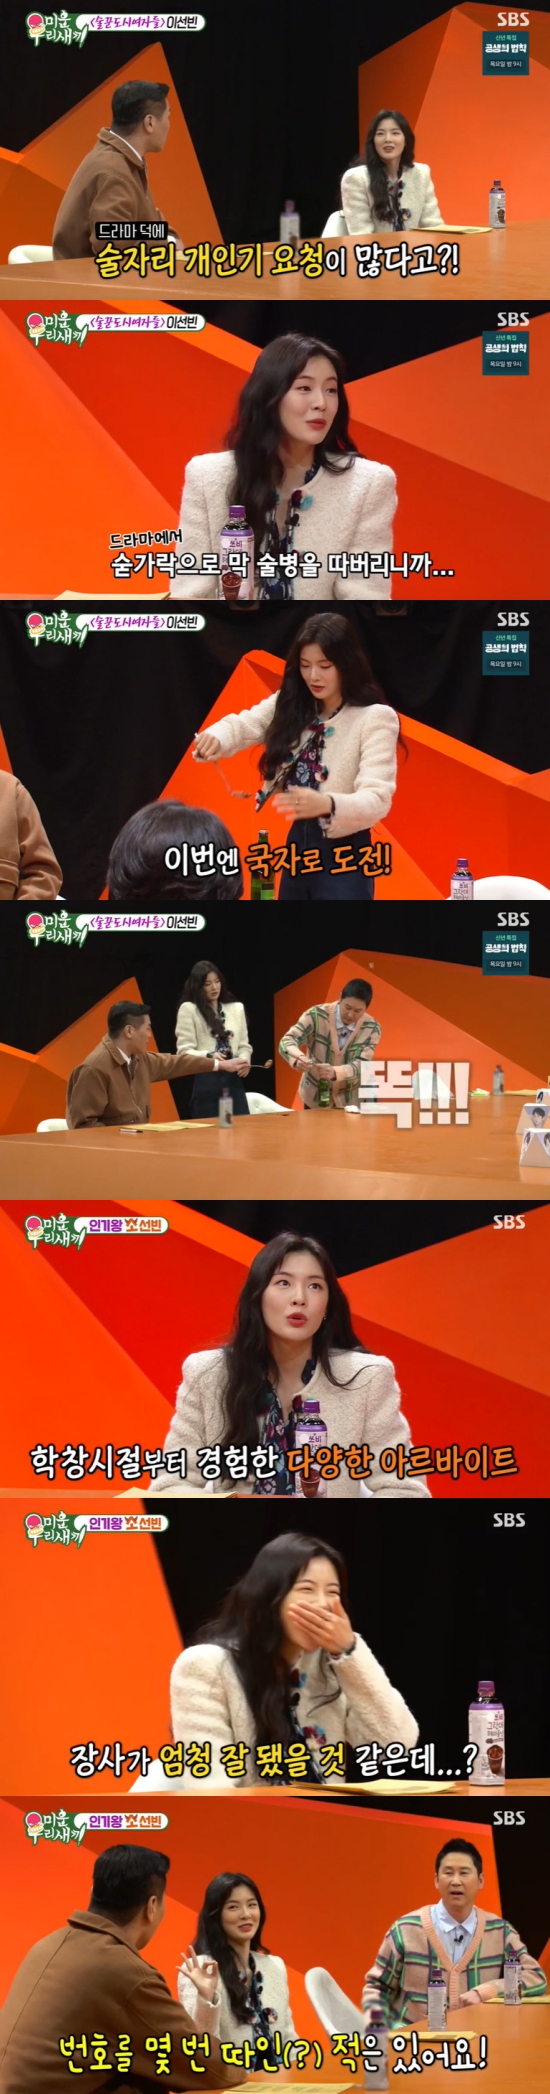 On the 9th SBS Ugly Duckling, Lee Sun-bin appeared as a special guest.Seo Jang-hoon said, Lee Sun-bin is a drama that has recently become a hot topic of drinking city girls. Shin Dong-yup said, The real topic was big.Lee Sun-bin said, I was worried a lot, but I love you a lot. I do not really feel it.Shin Dong-yup told the mothers: There are a lot of episodes like that that that happen when three of my best friends are drinking, drunken acting is so real.Sunbin can hardly drink, he explained about the drama.Seo Jang-hoon asked, There are many stories about showing a drinking party because of drinker city girls. Lee Sun-bin said, I am especially many.Im picking up the bottle with a spoon, he said.Lee laughed at the bottled beer prepared by the production team. Lee showed a personal period of picking the bottle cap with a spoon and failed to pick it with a ladle.Shin Dong-yup easily picked up the bottle cap with a ladle, and also hurriedly drank beer as it was full of bubbles.Lee Sun-bin has been working like a cow since his school days, said Seo Jang-hoon. Lee Sun-bins nickname is So Sun-bin.Lee Sun-bin said, I did a few short months of short-term fliers and publicity magnets for each house, and I had the longest time in duck meat, pork belly, and Ice cream stores.When I work at the Ice cream store, my muscles here (both arms) are different, he recalled.Seo Jang-hoon said, If Mr. Sunbin had worked at the Ice cream store, did not it have that point, or that it was very good in the neighborhood.I expected that there were a lot of customers to see Mr. Sunbin, Lee Sun-bin said, I am a dragon case. Of course, I have picked up a number several times.There are people who asked me about the number twice, but I am famous and I was not in this style at all. Seo Jang-hoon wondered, Did you have a big change now? Lee Sun-bin said, I am getting a lot of power in the toilet.Tony Ahns mother expressed interest, saying, My personality is lively, spooky and diligent. Did I marriage? And Seo Jang-hoon said, I am sorry for my mother.You thought of Tony. Im afraid so. Im trying to block the source. He mentioned the presence of Lee Kwang-soo, who is openly devoted.Furthermore, Kim Jong Kooks mother wondered, What happens to your brother? Lee Sun Bin said, I have a brother.Shin Dong-yup said, I have someone, and Seo Jang-hoon nailed it, saying,  (Lee Kwang-soo) is too close to the end.Photo = SBS broadcast screen